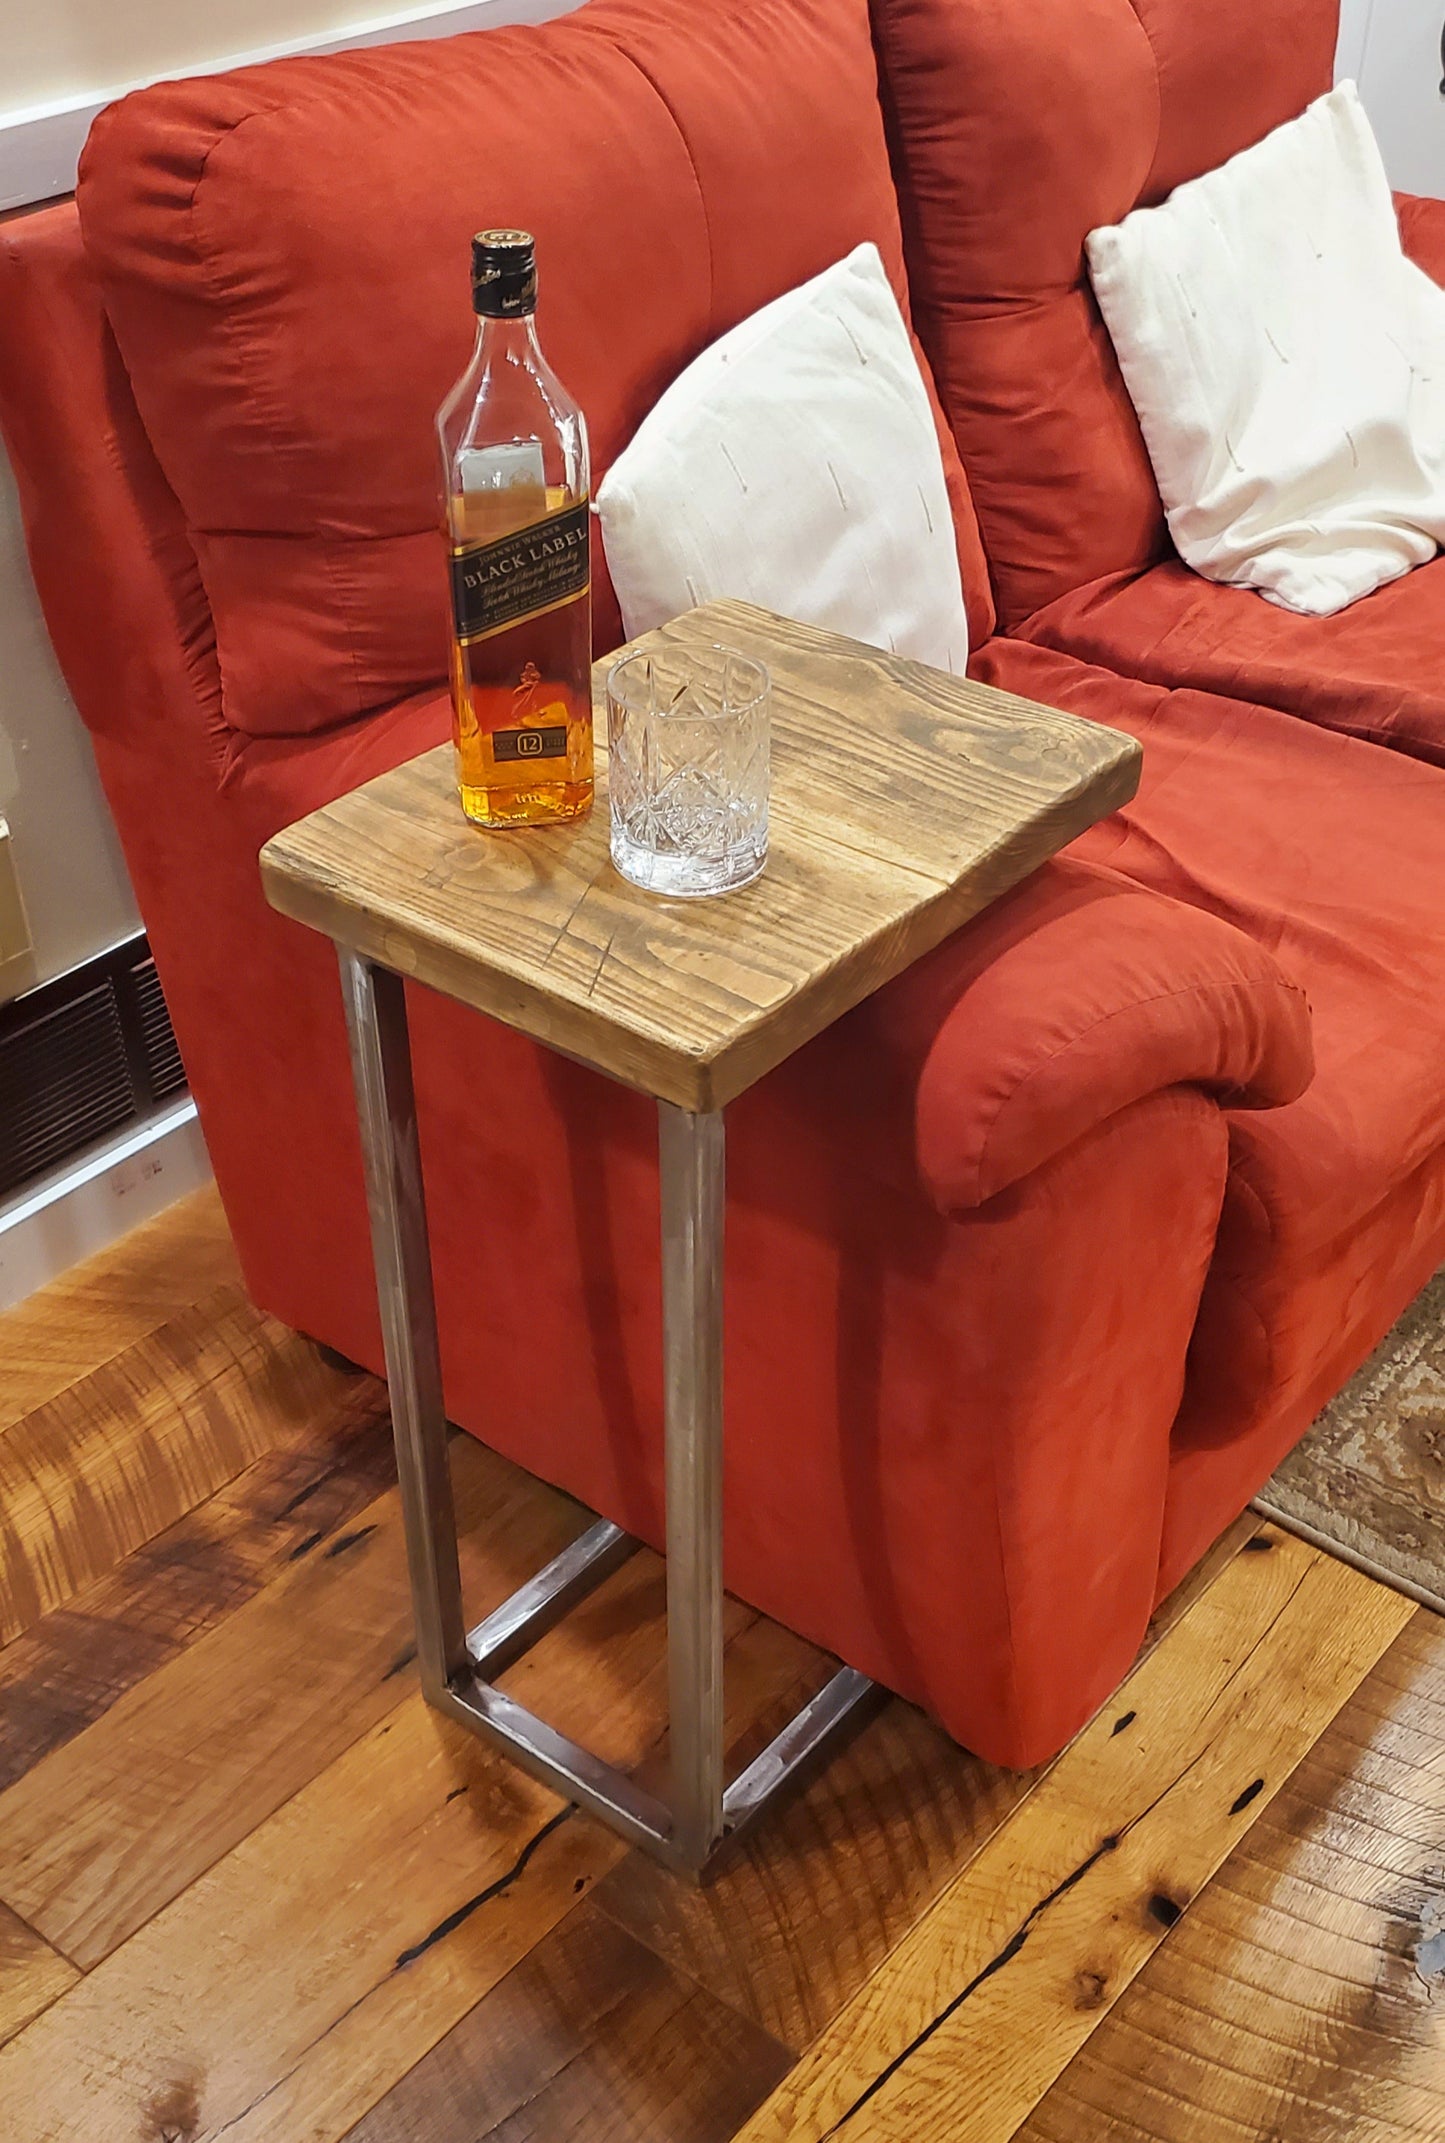 Side Stand Table - Frame only (no top)